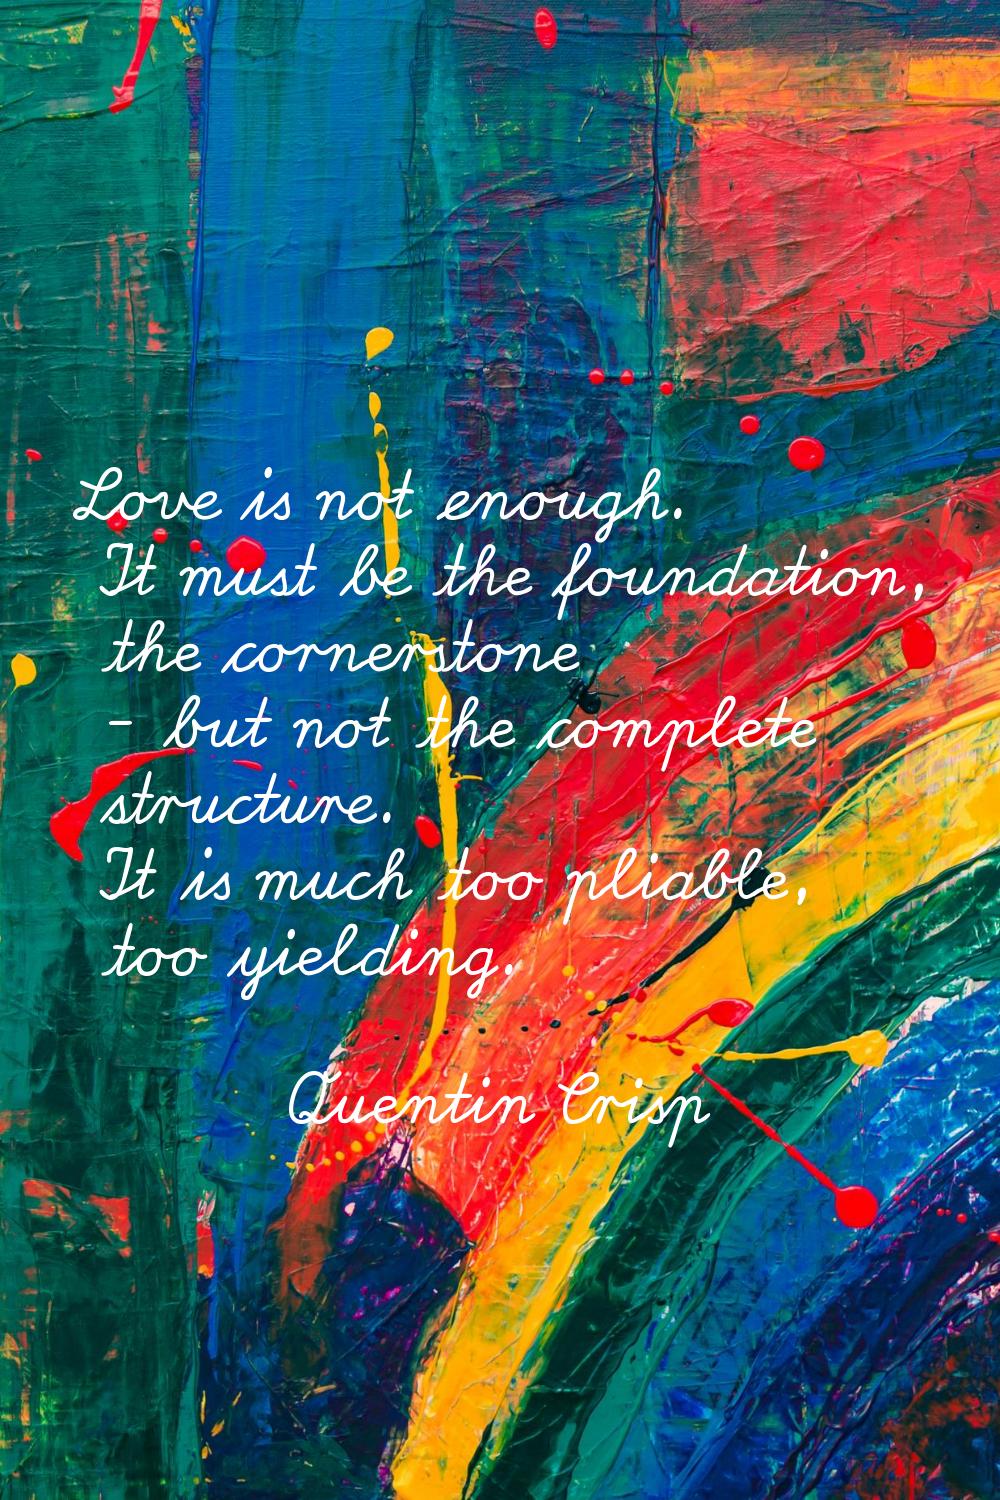 Love is not enough. It must be the foundation, the cornerstone - but not the complete structure. It